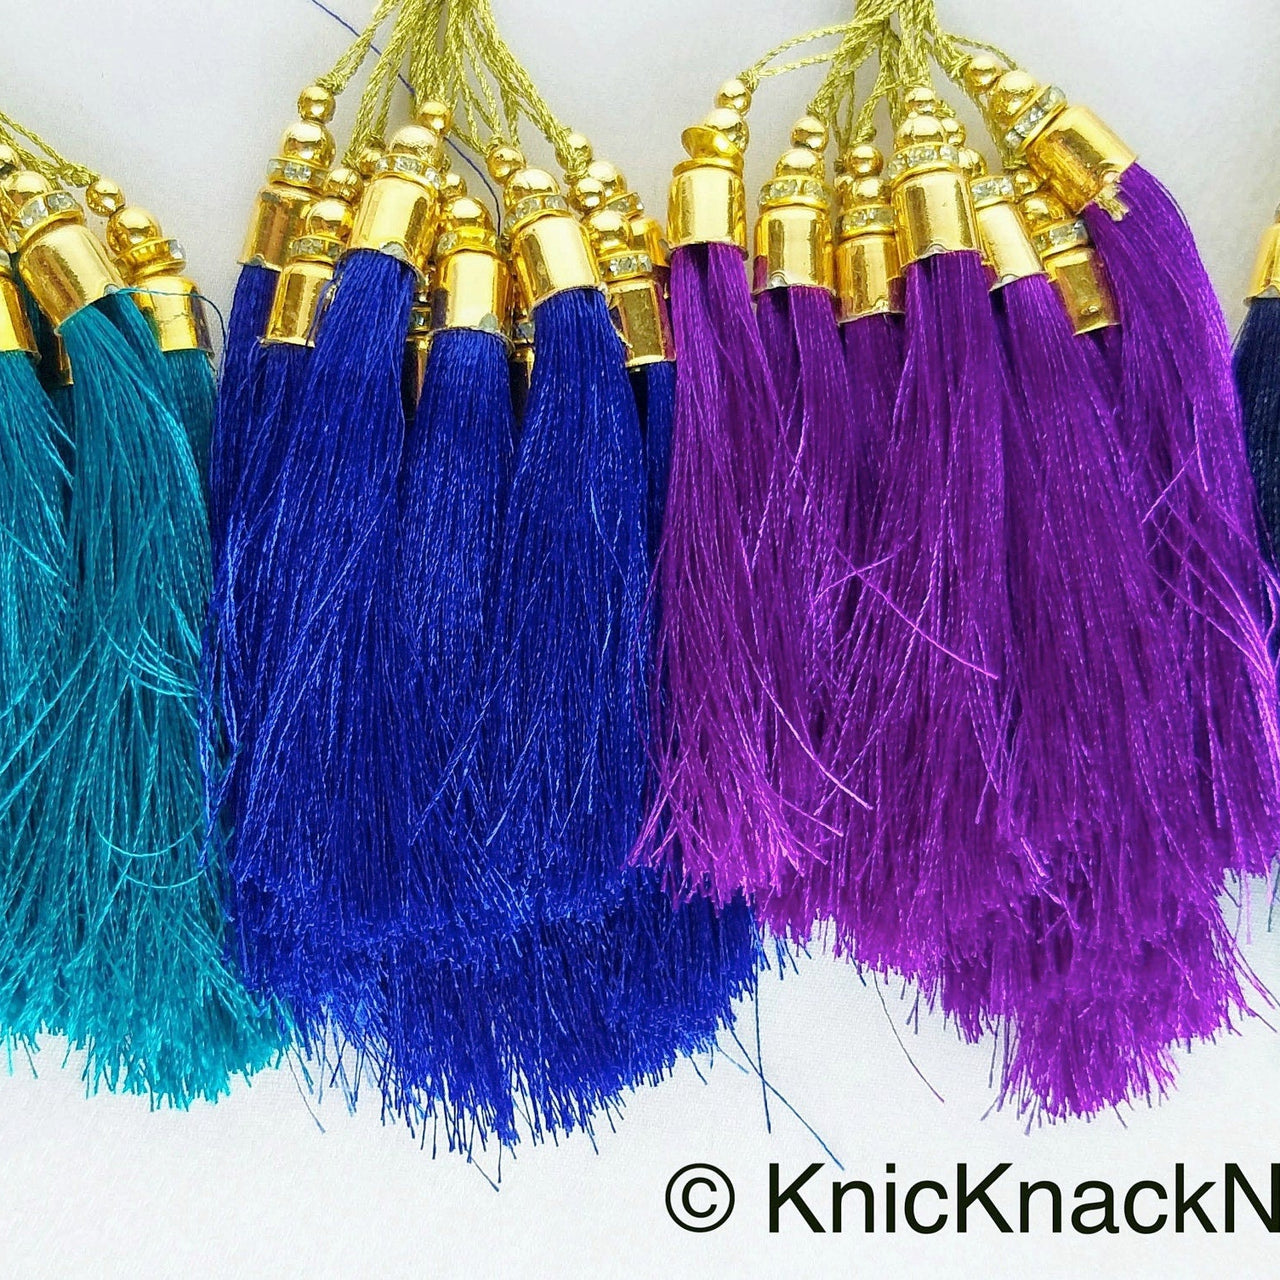 Violet Tassels With Gold Cap And Beads, Tassel Charms, Nylon Tassels x 12